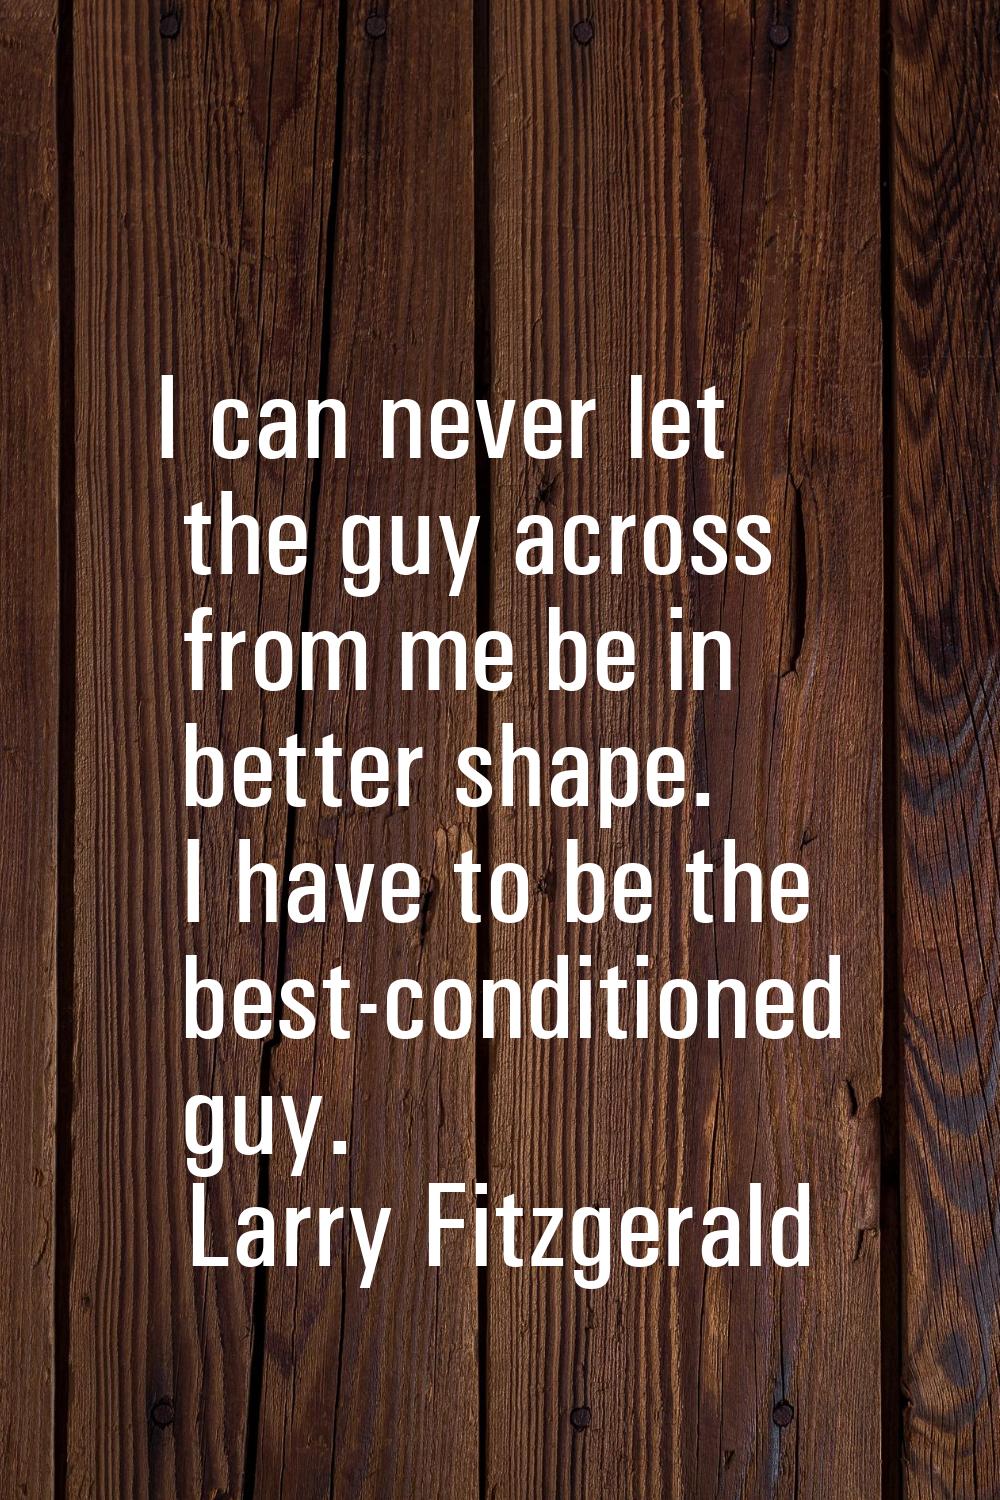 I can never let the guy across from me be in better shape. I have to be the best-conditioned guy.